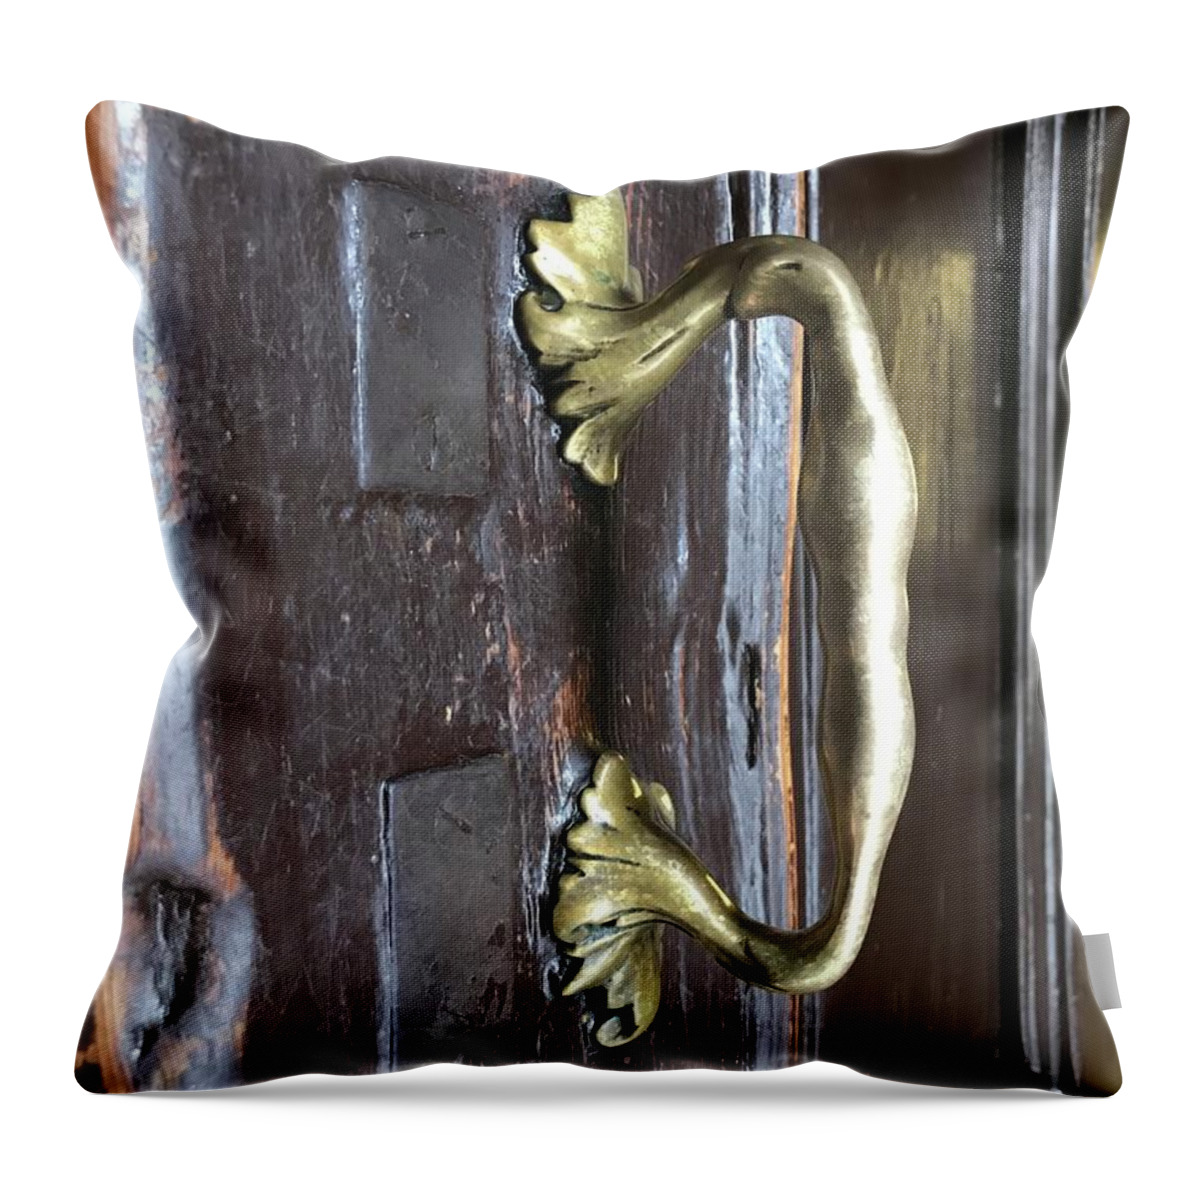  Throw Pillow featuring the photograph Fara2019 by Mary Kobet